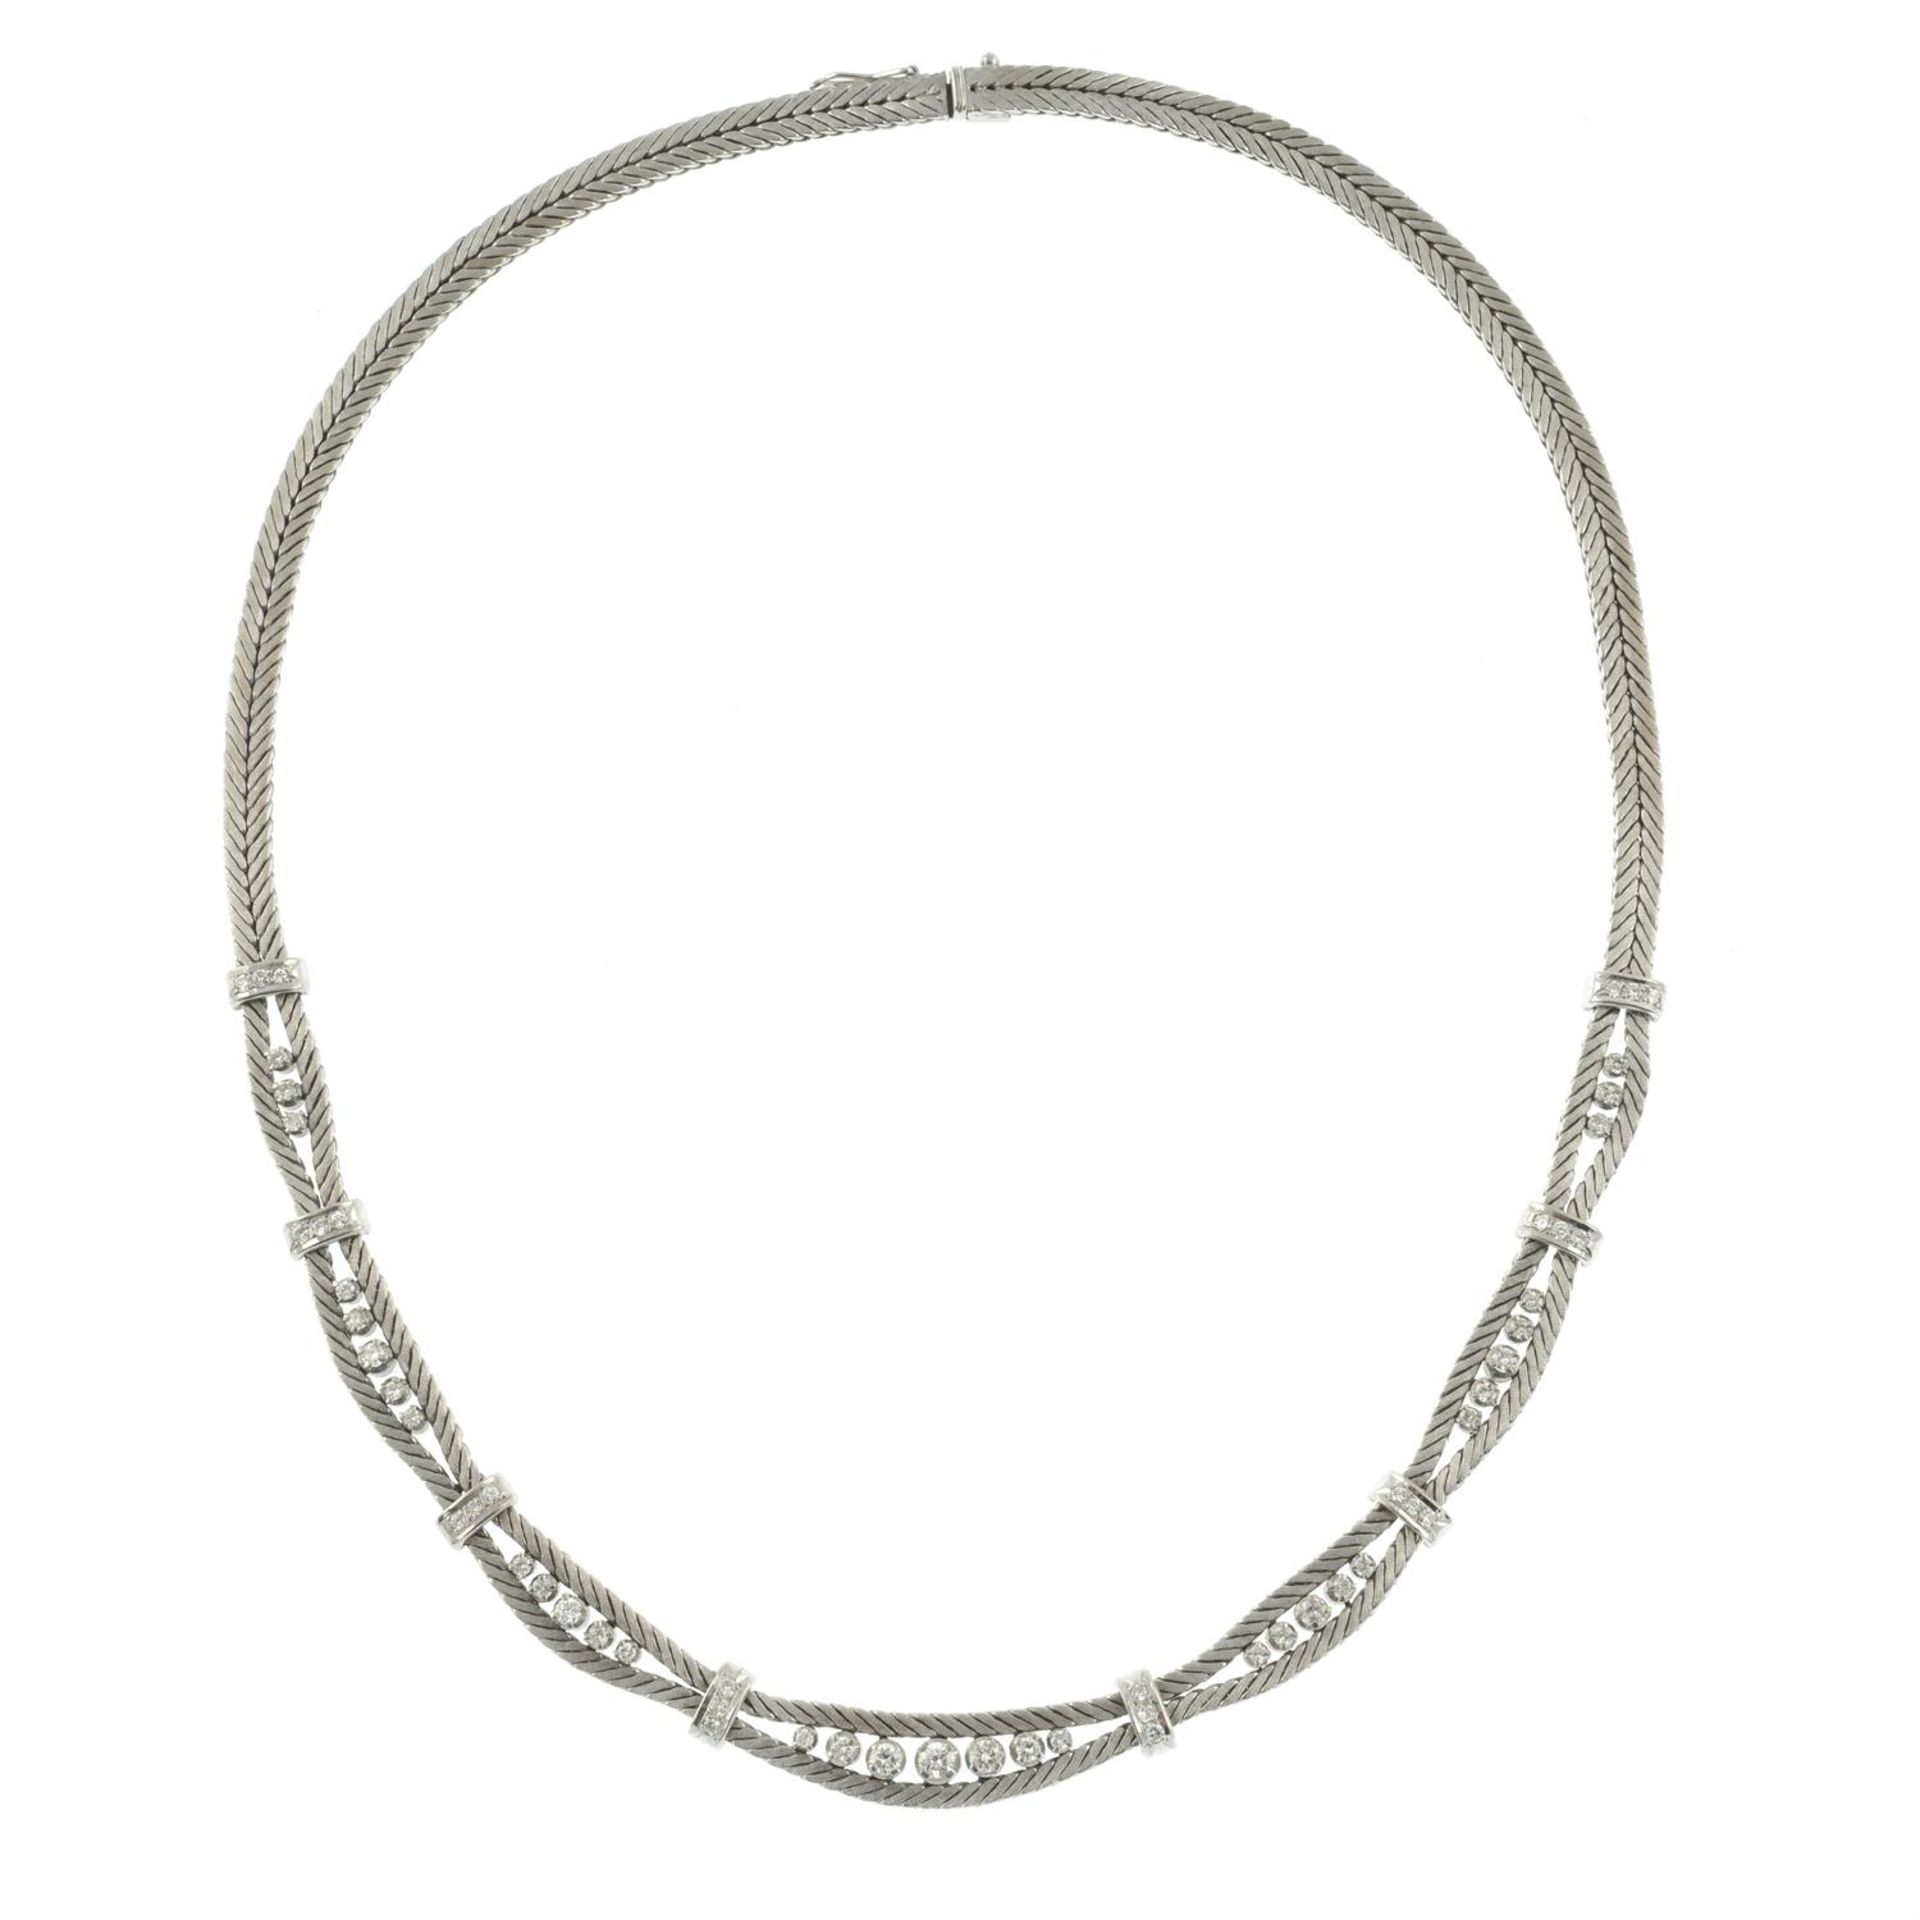 A mid 20th century 18ct gold textured herringbone-link necklace, with brilliant-cut diamond spacers. - Image 3 of 4